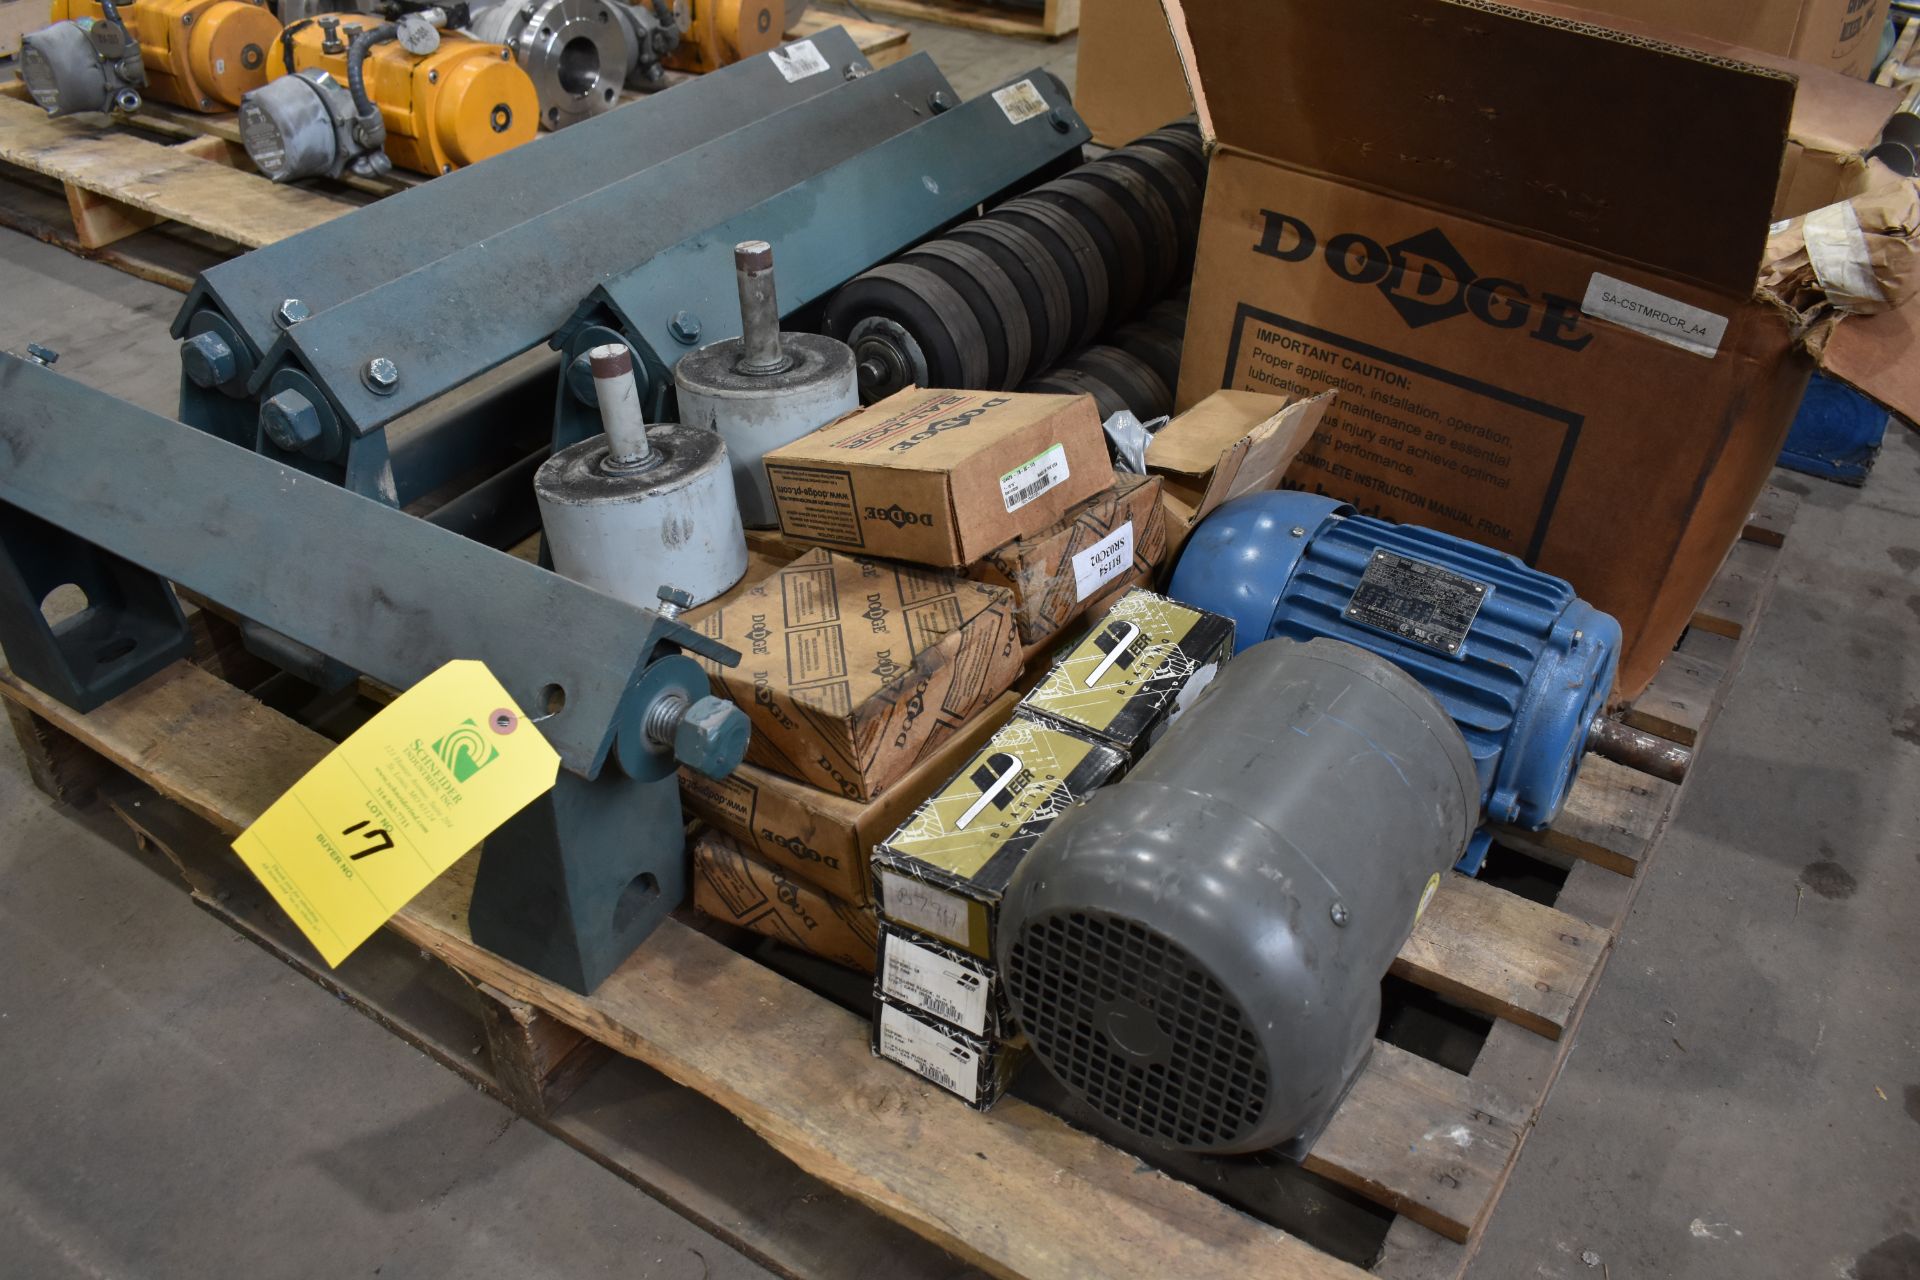 (17) Dodge/Peer Bearings - Assorted, Oucintis Gear Reducer, (4) 30-TX Components, (3) Rollers - Image 2 of 3